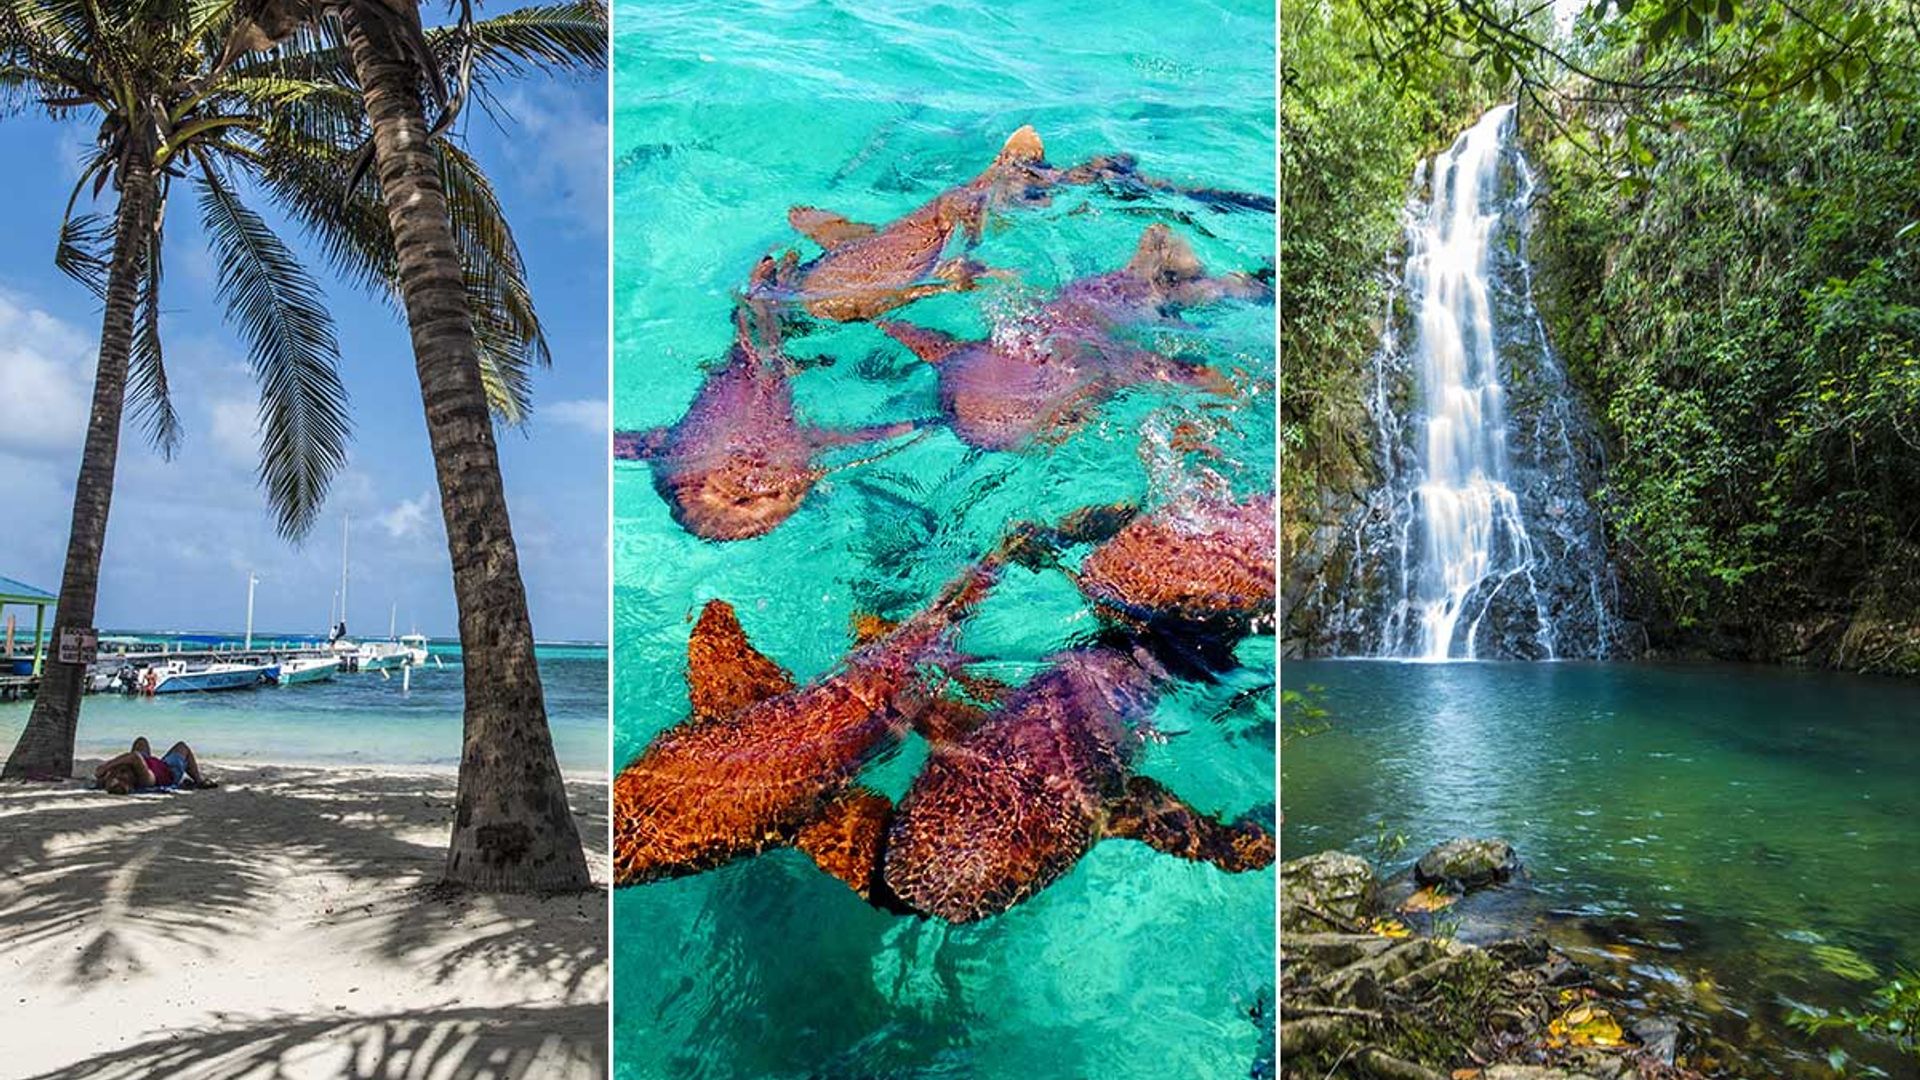 Why beautiful Belize should be on your 2020 travel bucket list 